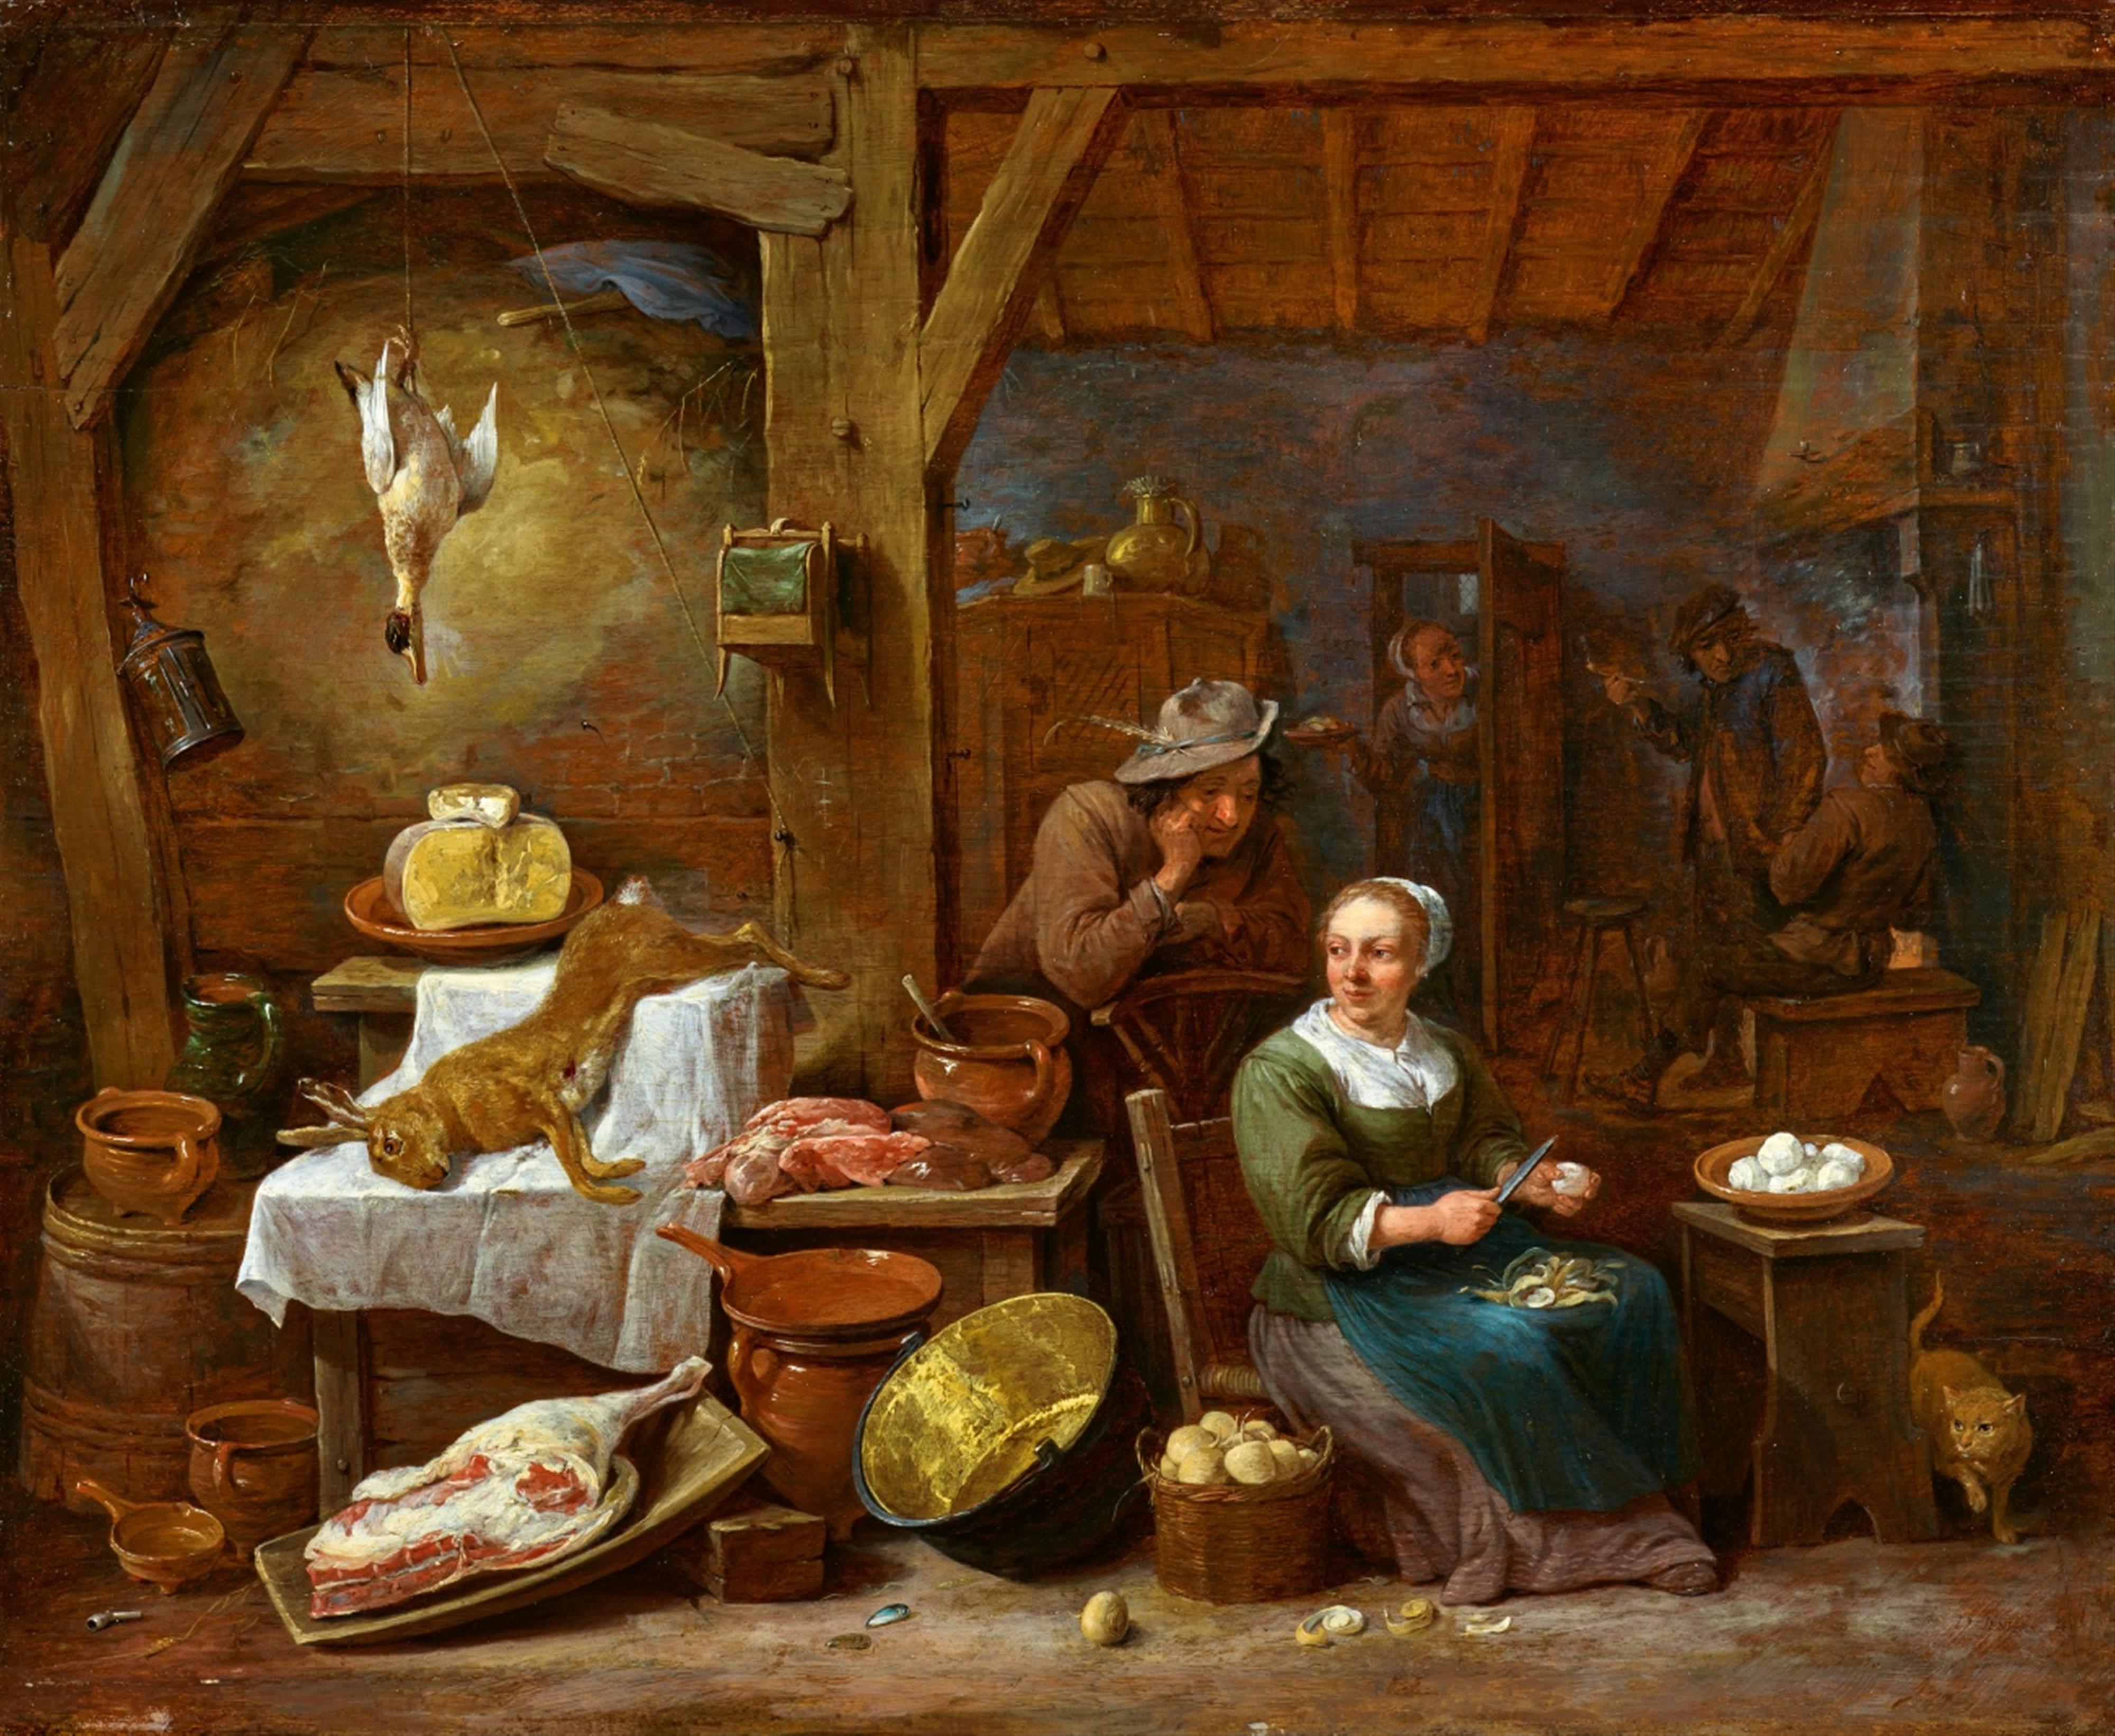 David Teniers the Younger - Rustic Kitchen Still Life with a Couple - image-1